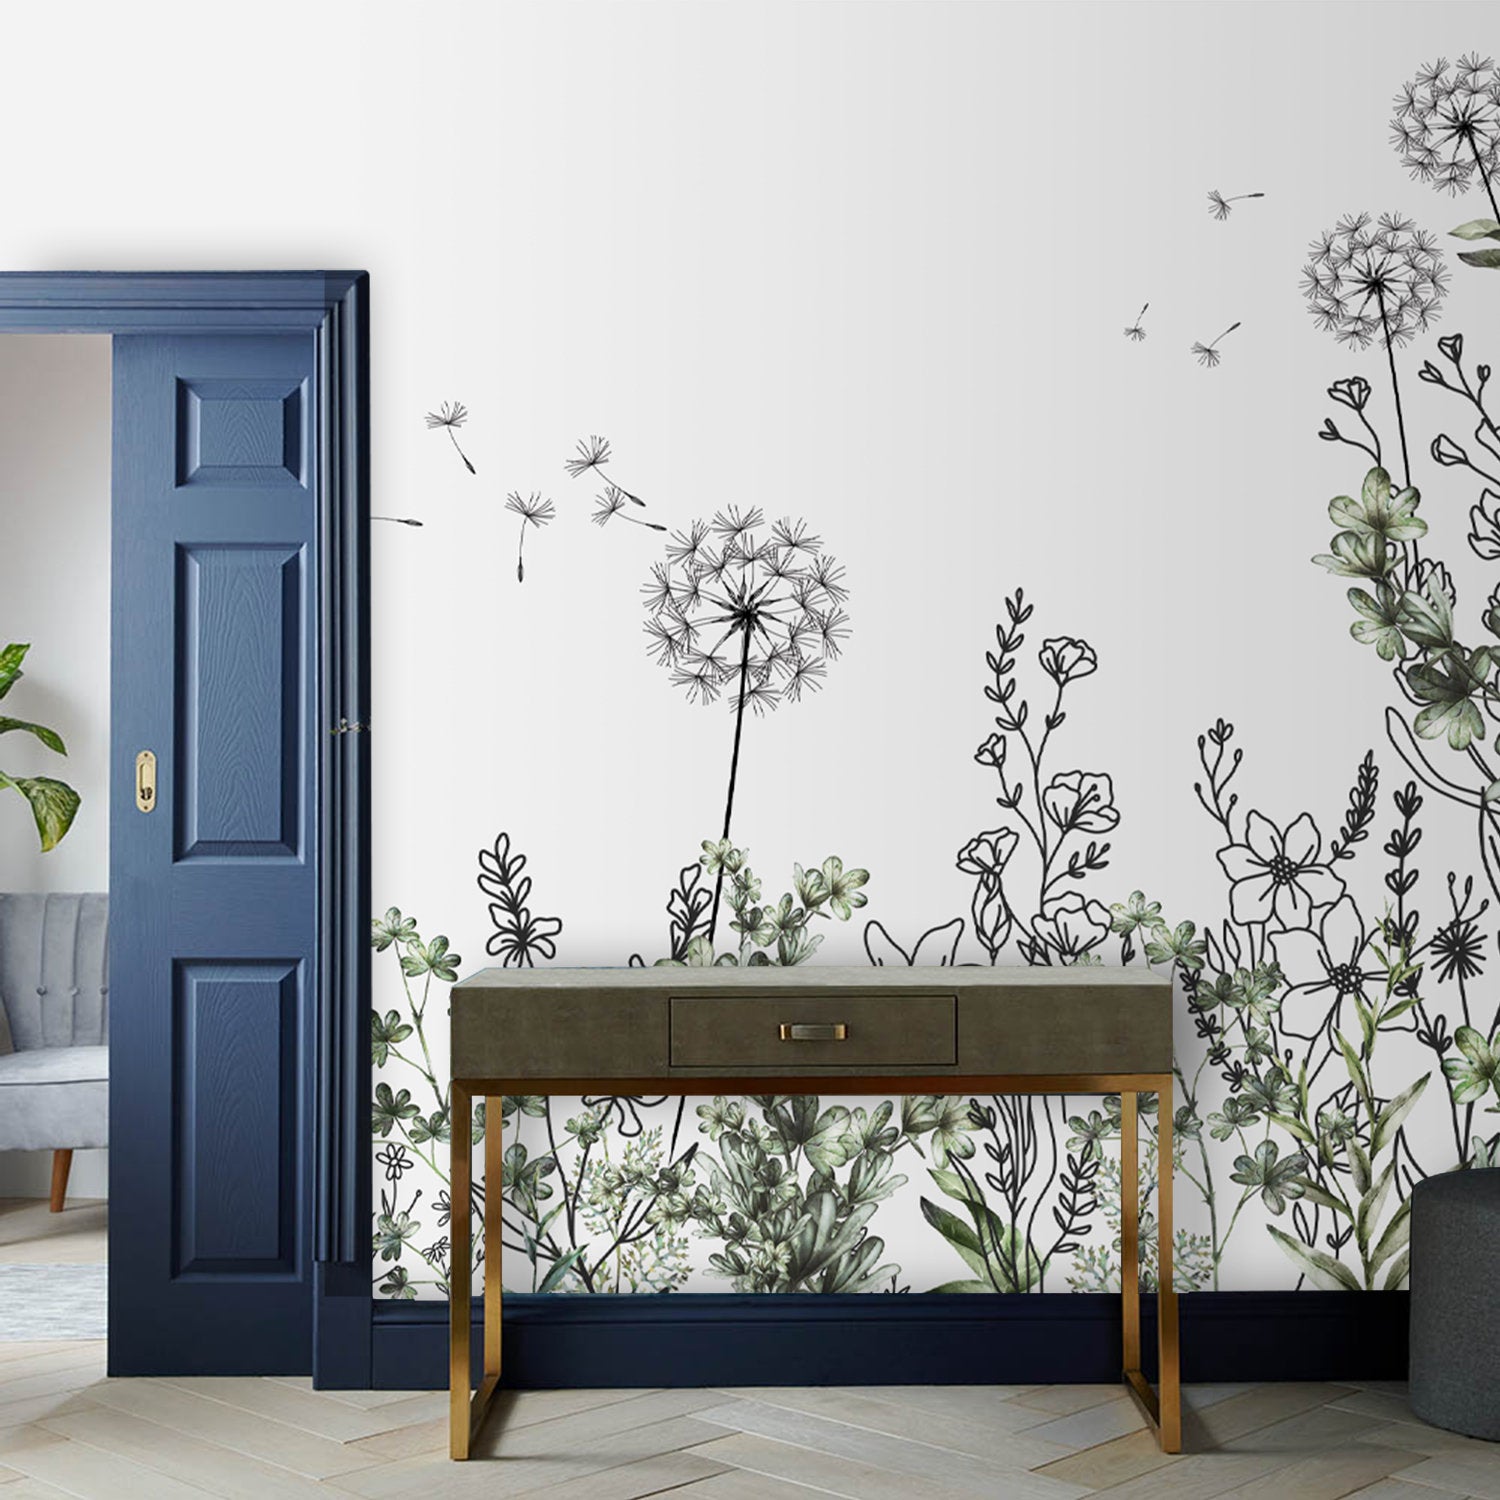 Hand Draw Abstract Garden Plants Flowers Wallpaper Self Adhesive Peel and Stick Wall Sticker Wall Decoration Scandinavian Design Removable